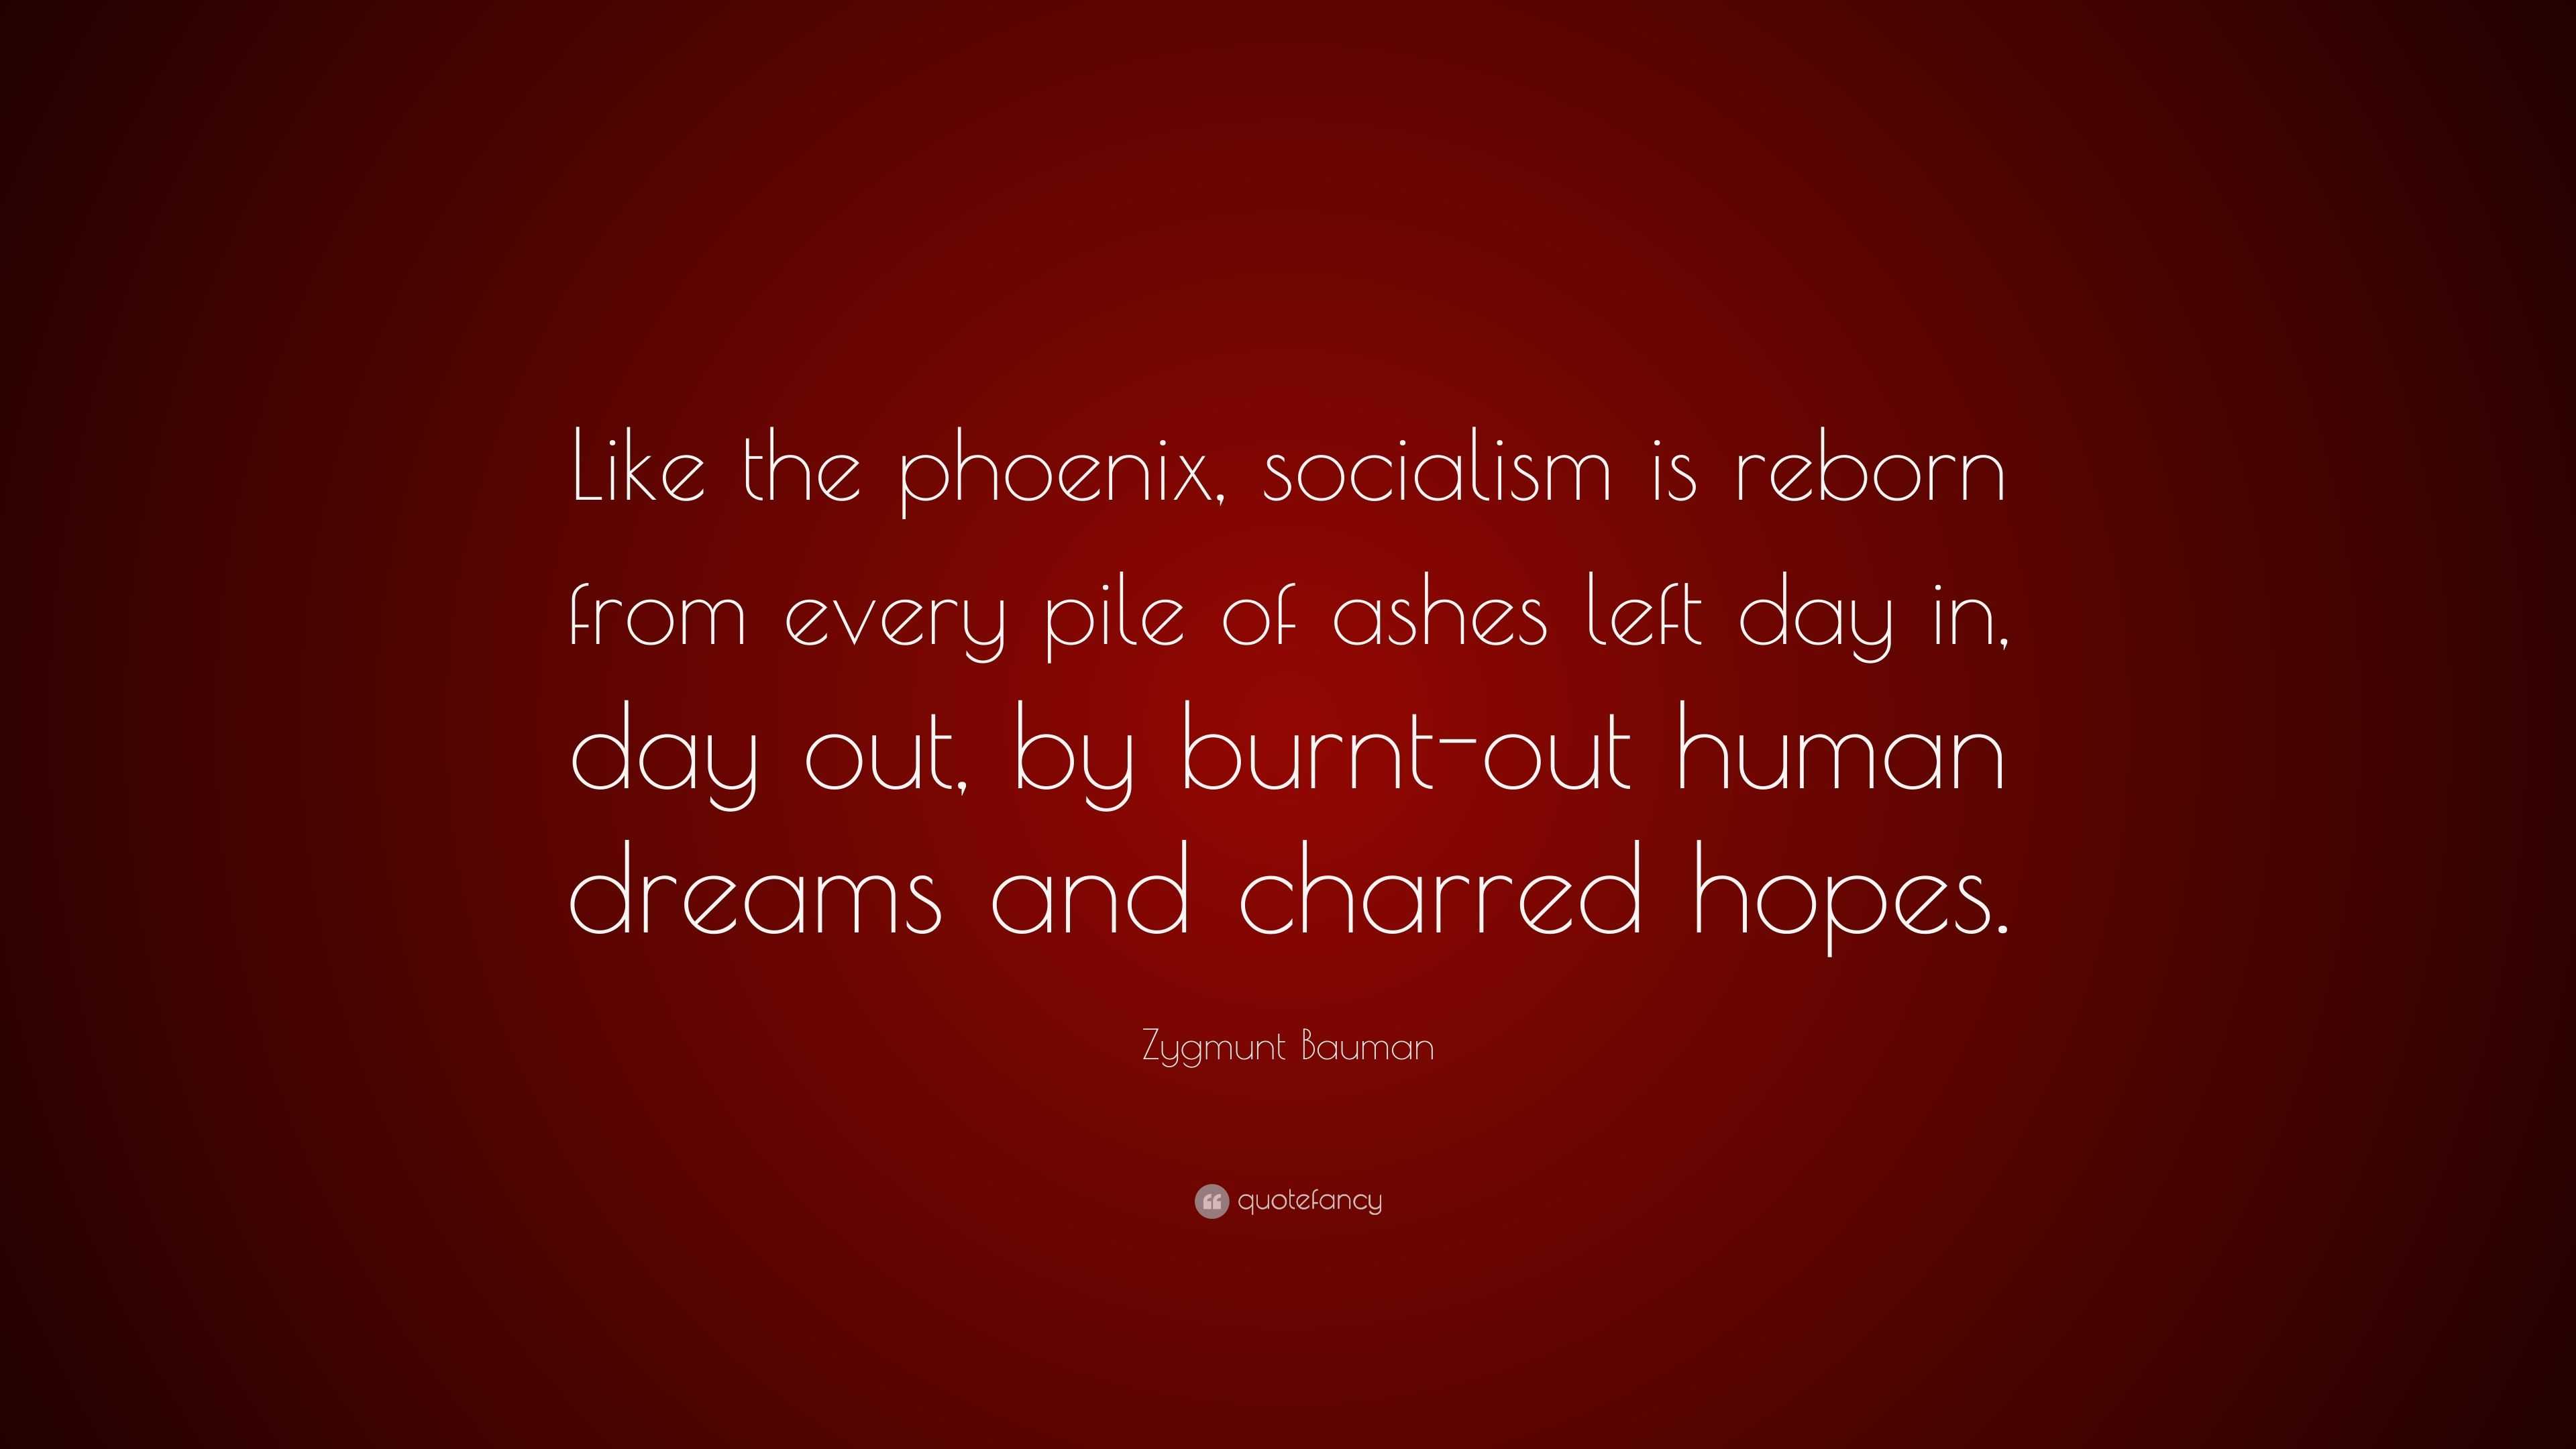 Zygmunt Bauman Quote Like The Phoenix Socialism Is Reborn From Every Pile Of Ashes Left Day In Day Out By Burnt Out Human Dreams And Charr